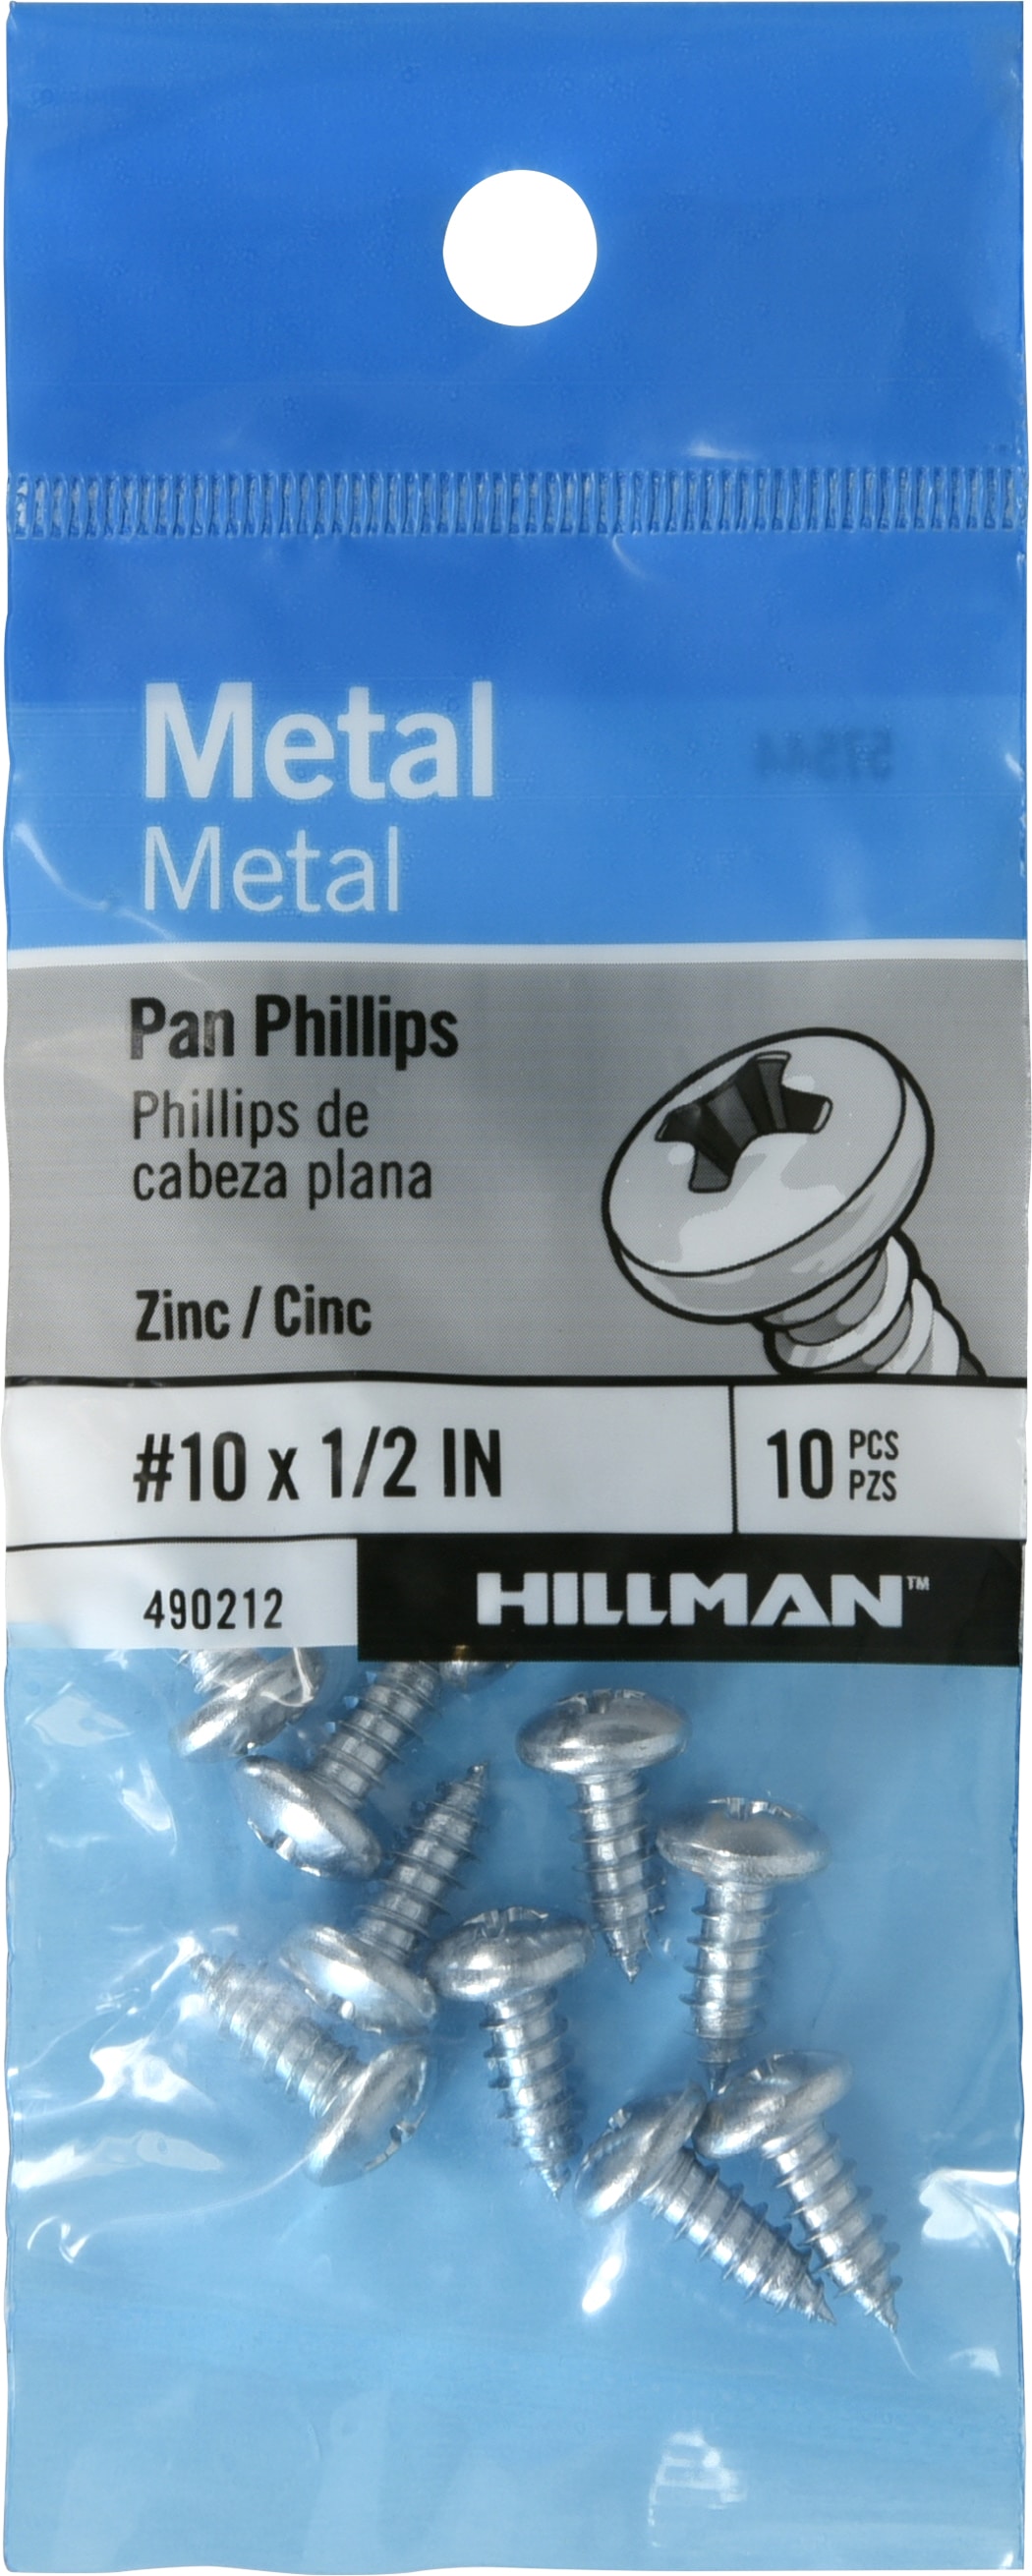 4-Pack The Hillman Group 3667 3/8 By 2-1/2-Inch Lag Screw Stainless Steel 